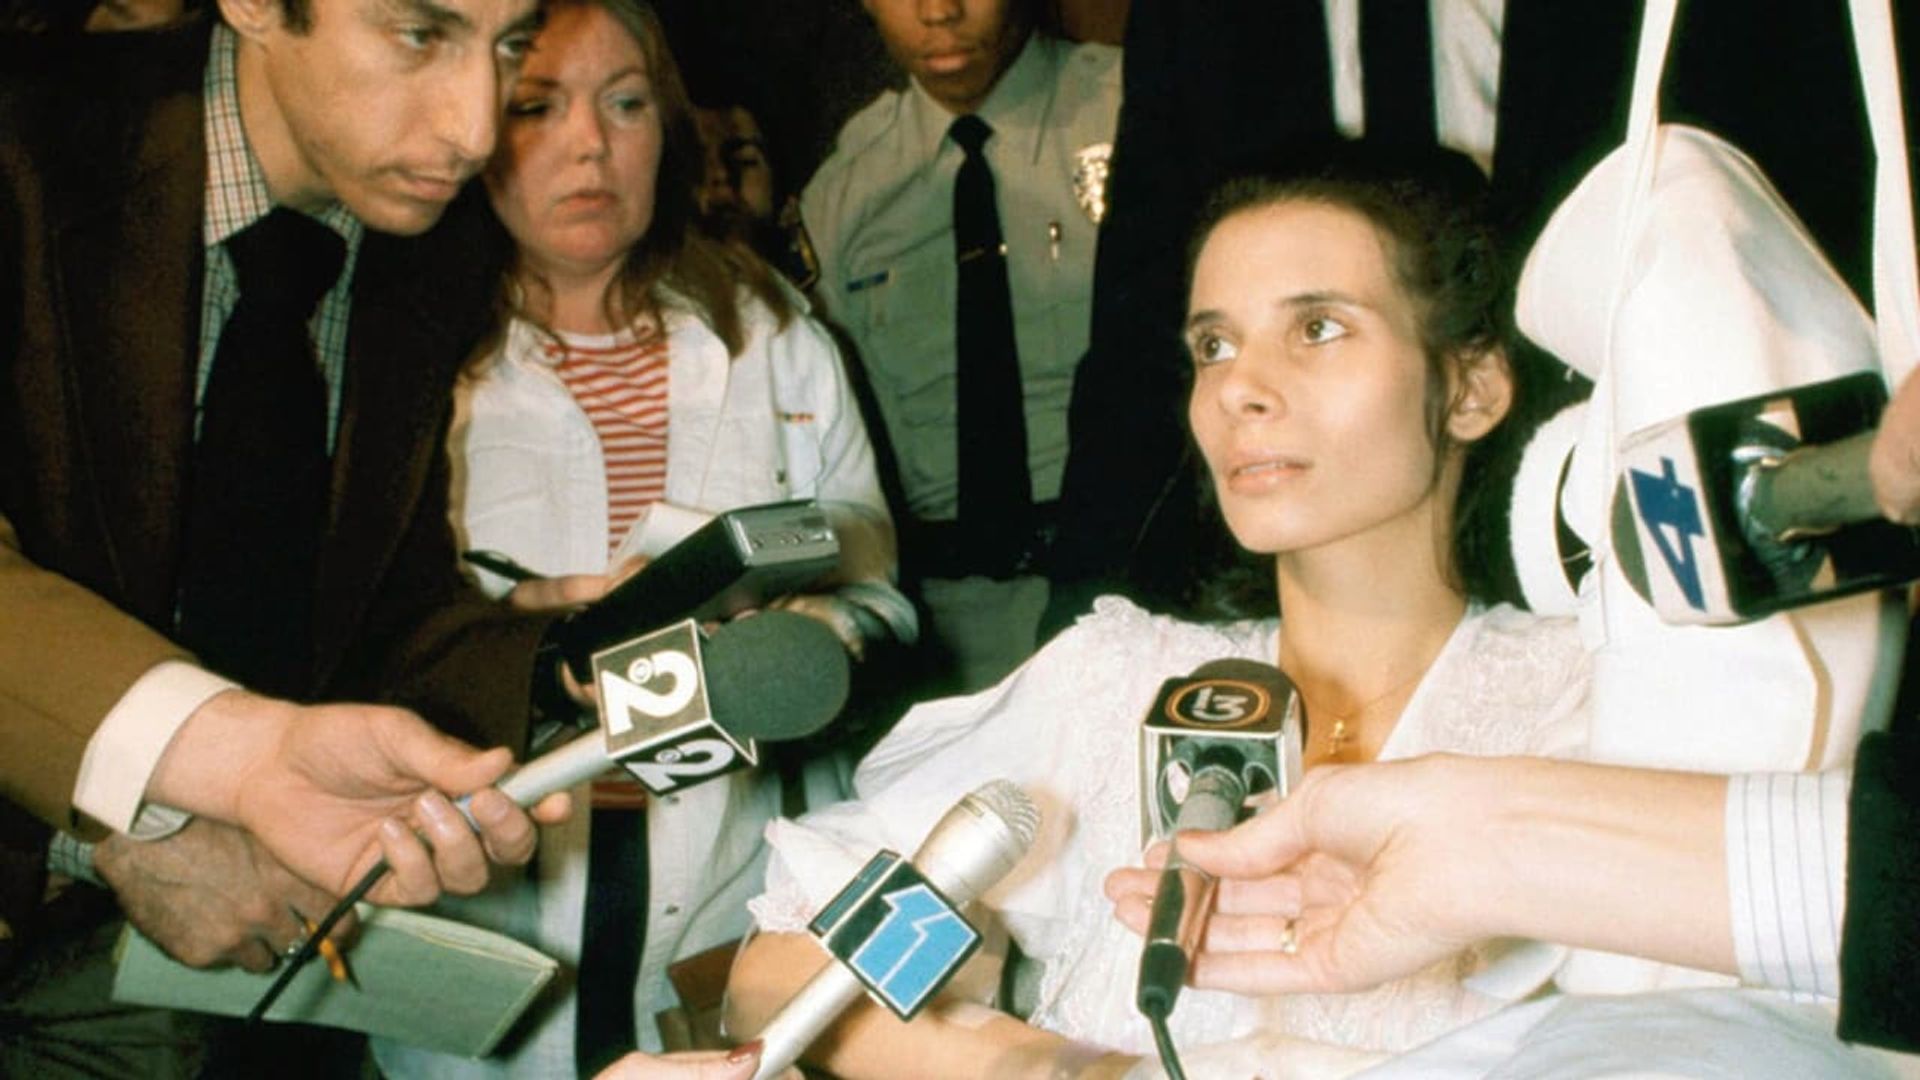 Victims for Victims: The Theresa Saldana Story background